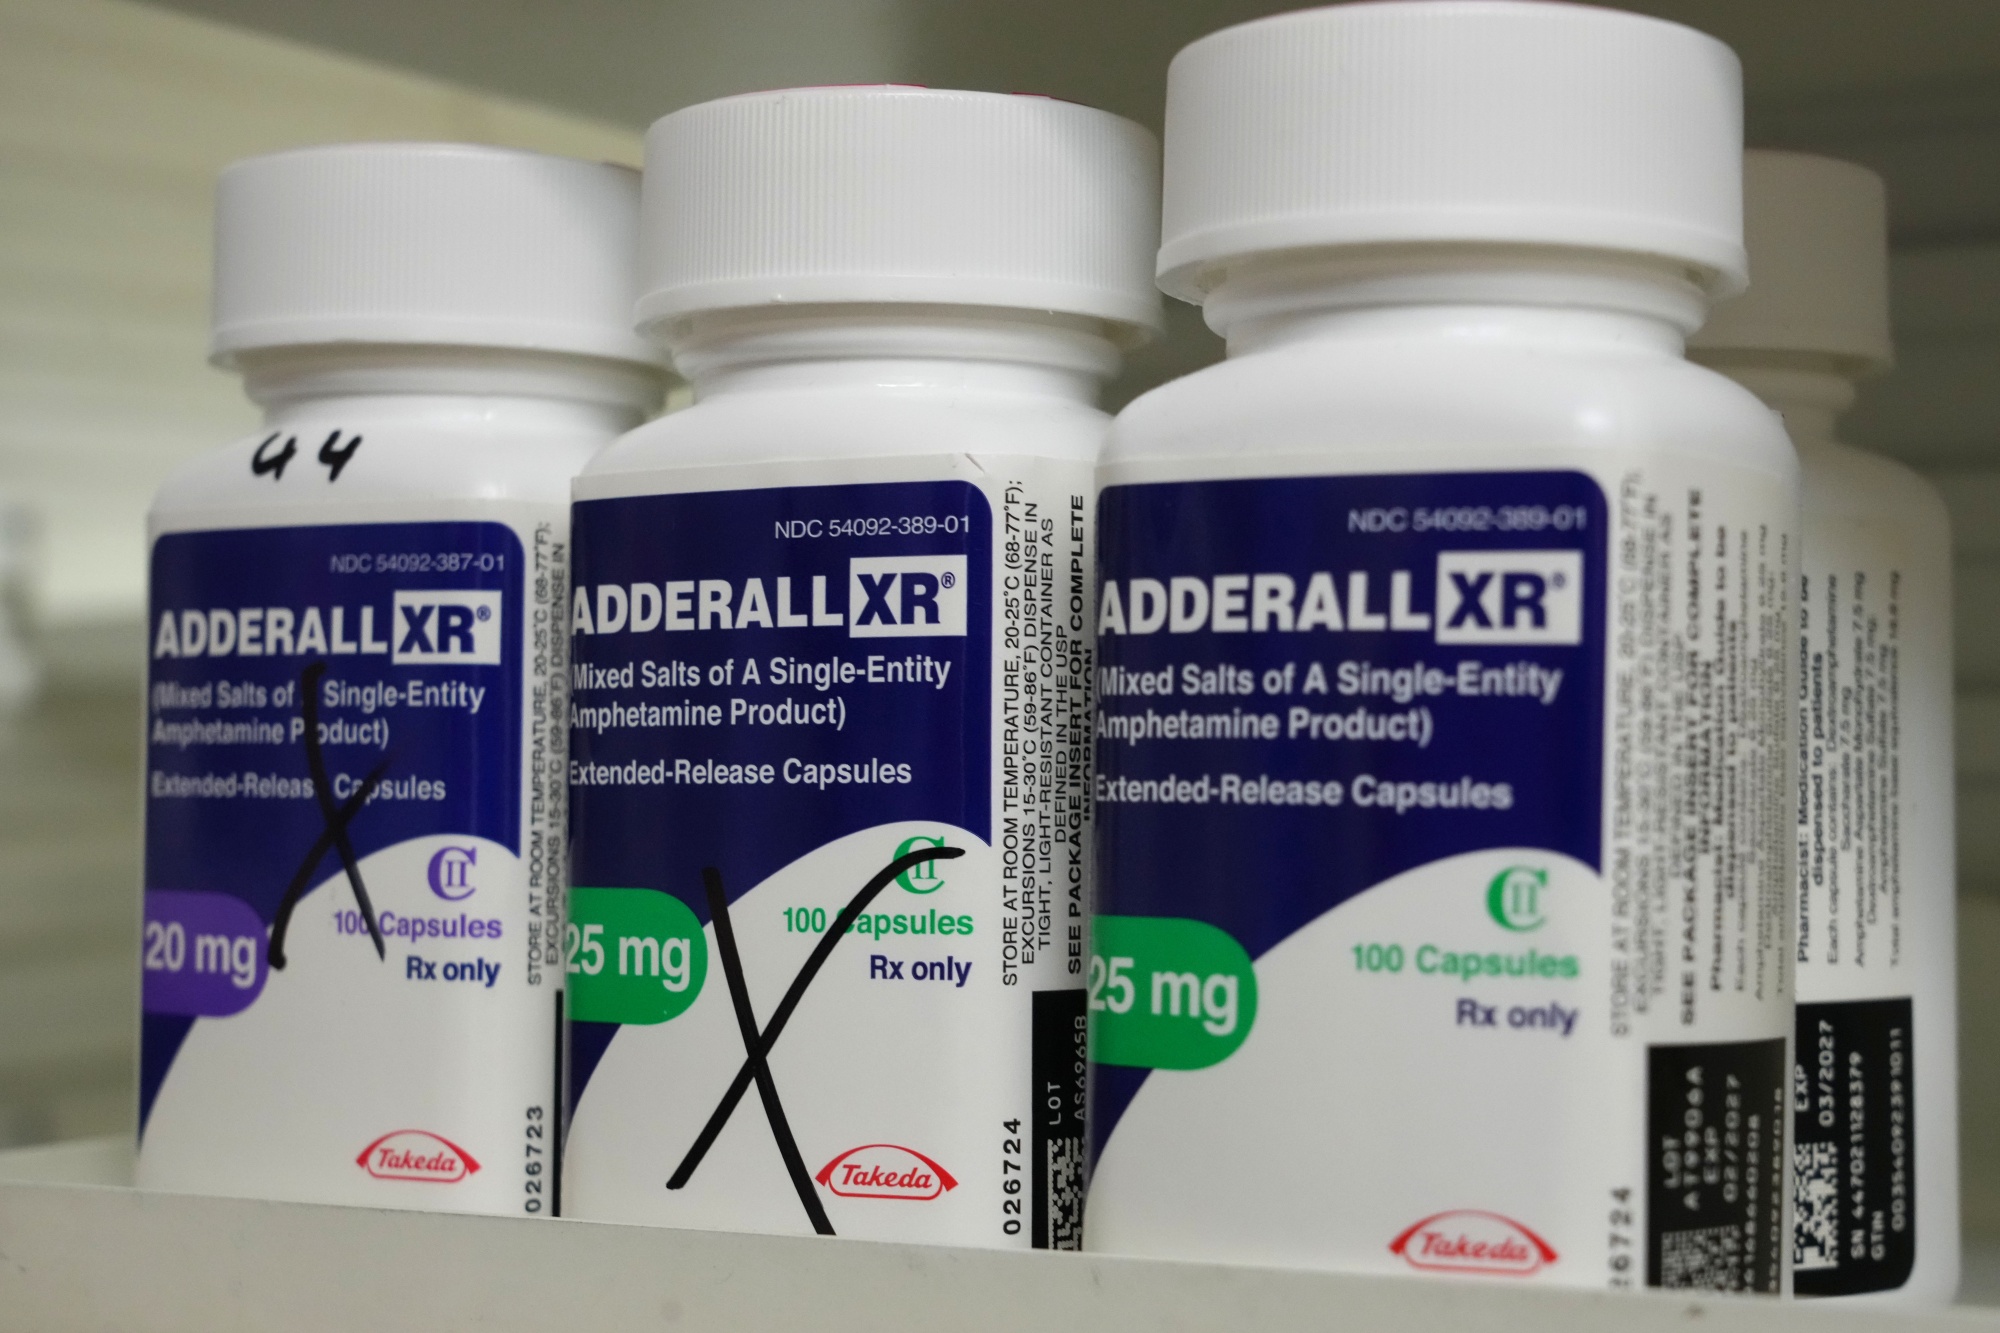 Modafinil Vs Adderall: Which Works Faster?